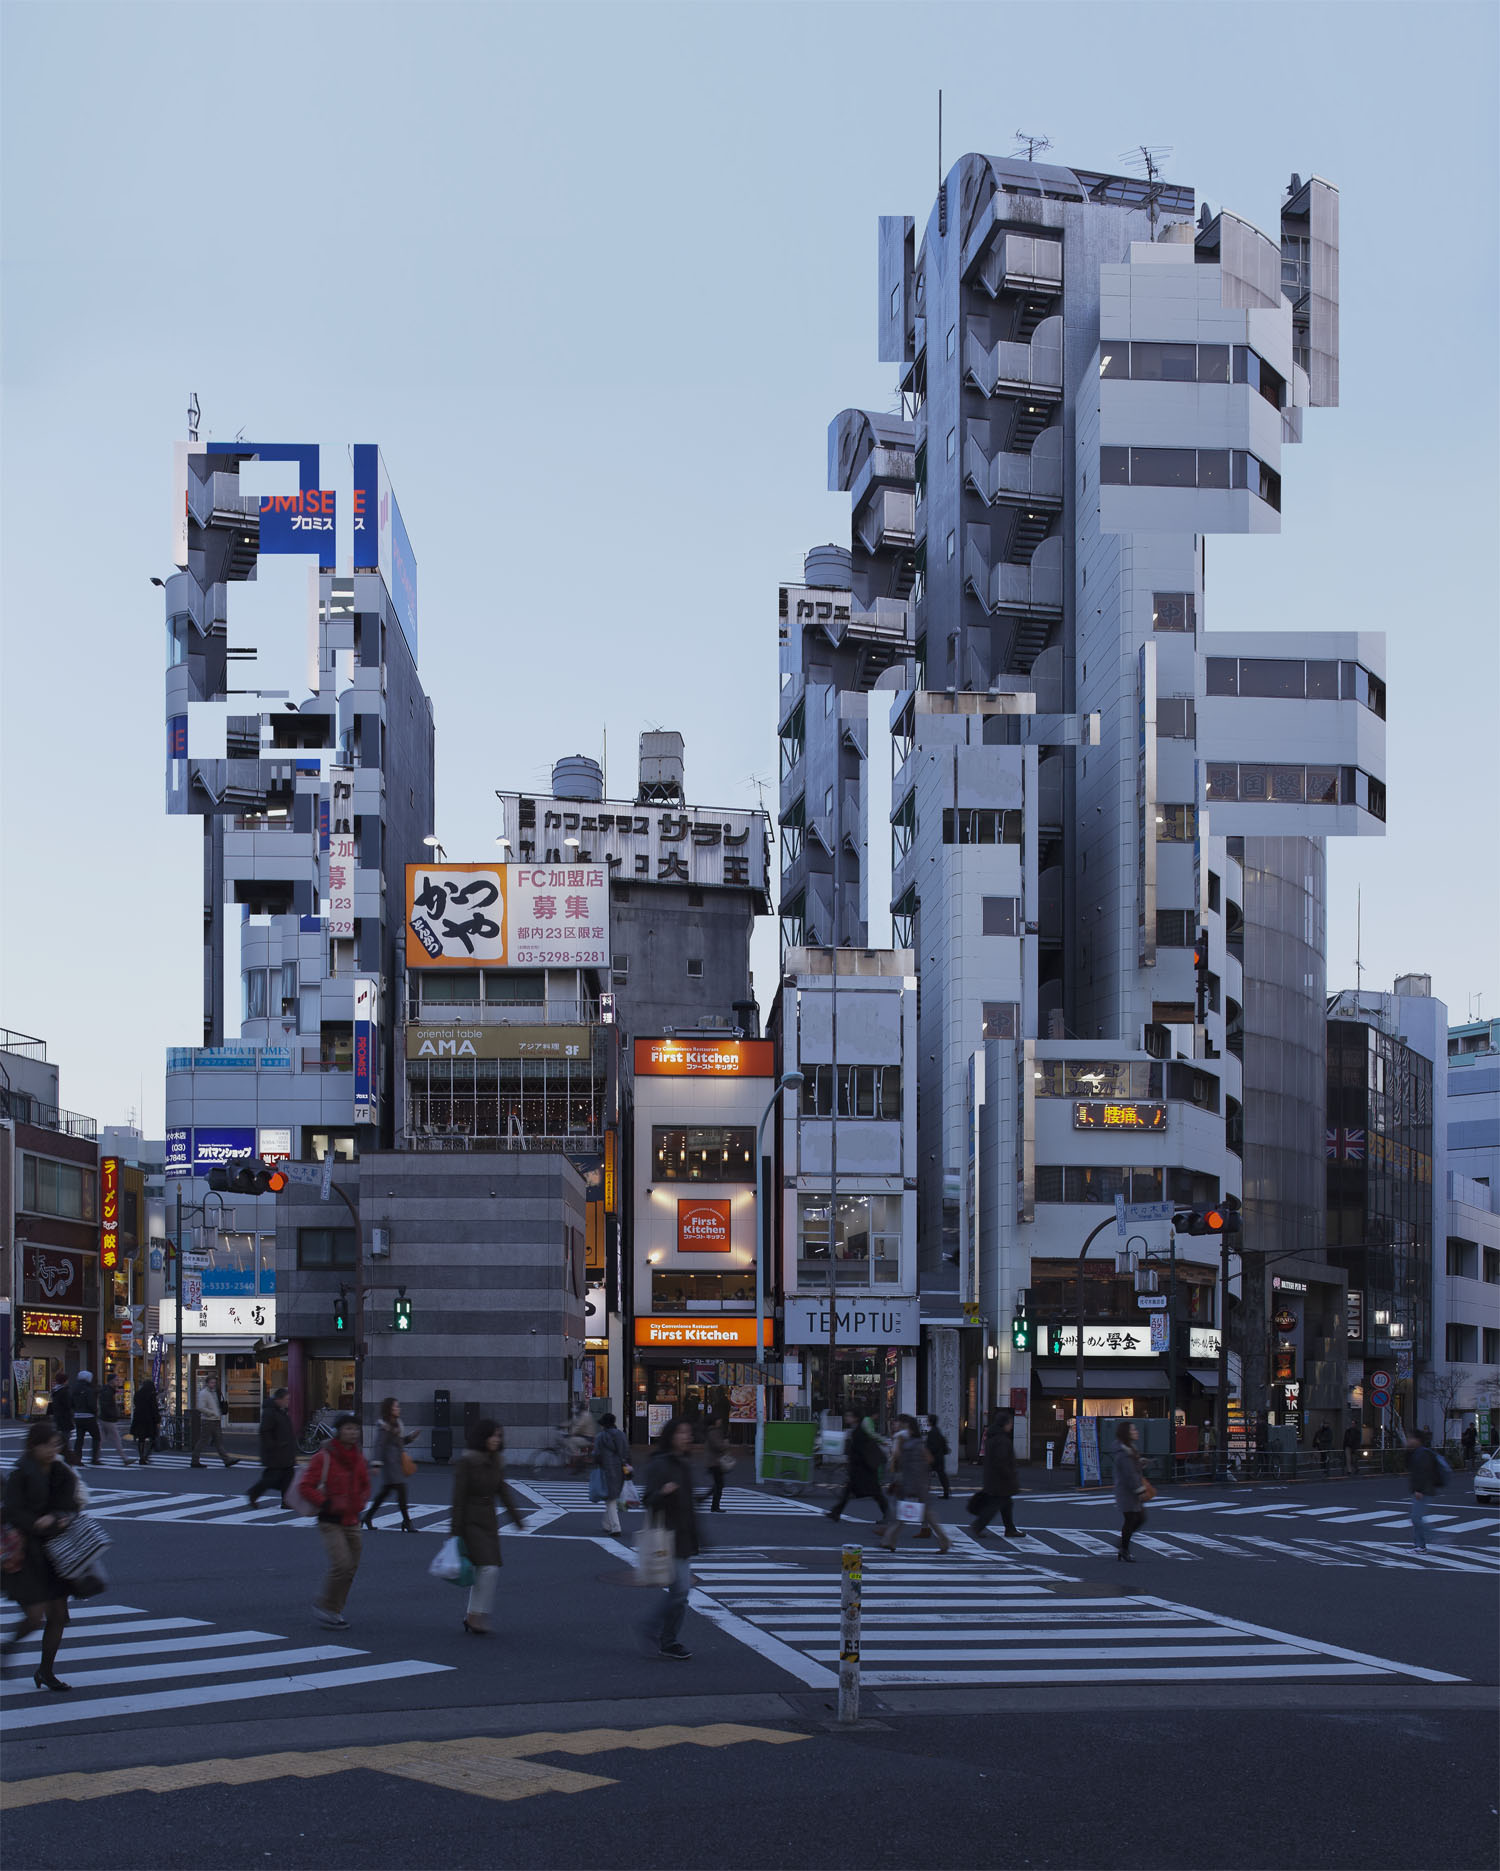 Anarchitecture in Tokyo (from WYSI*not*WYG project by Olivier Ratsi)